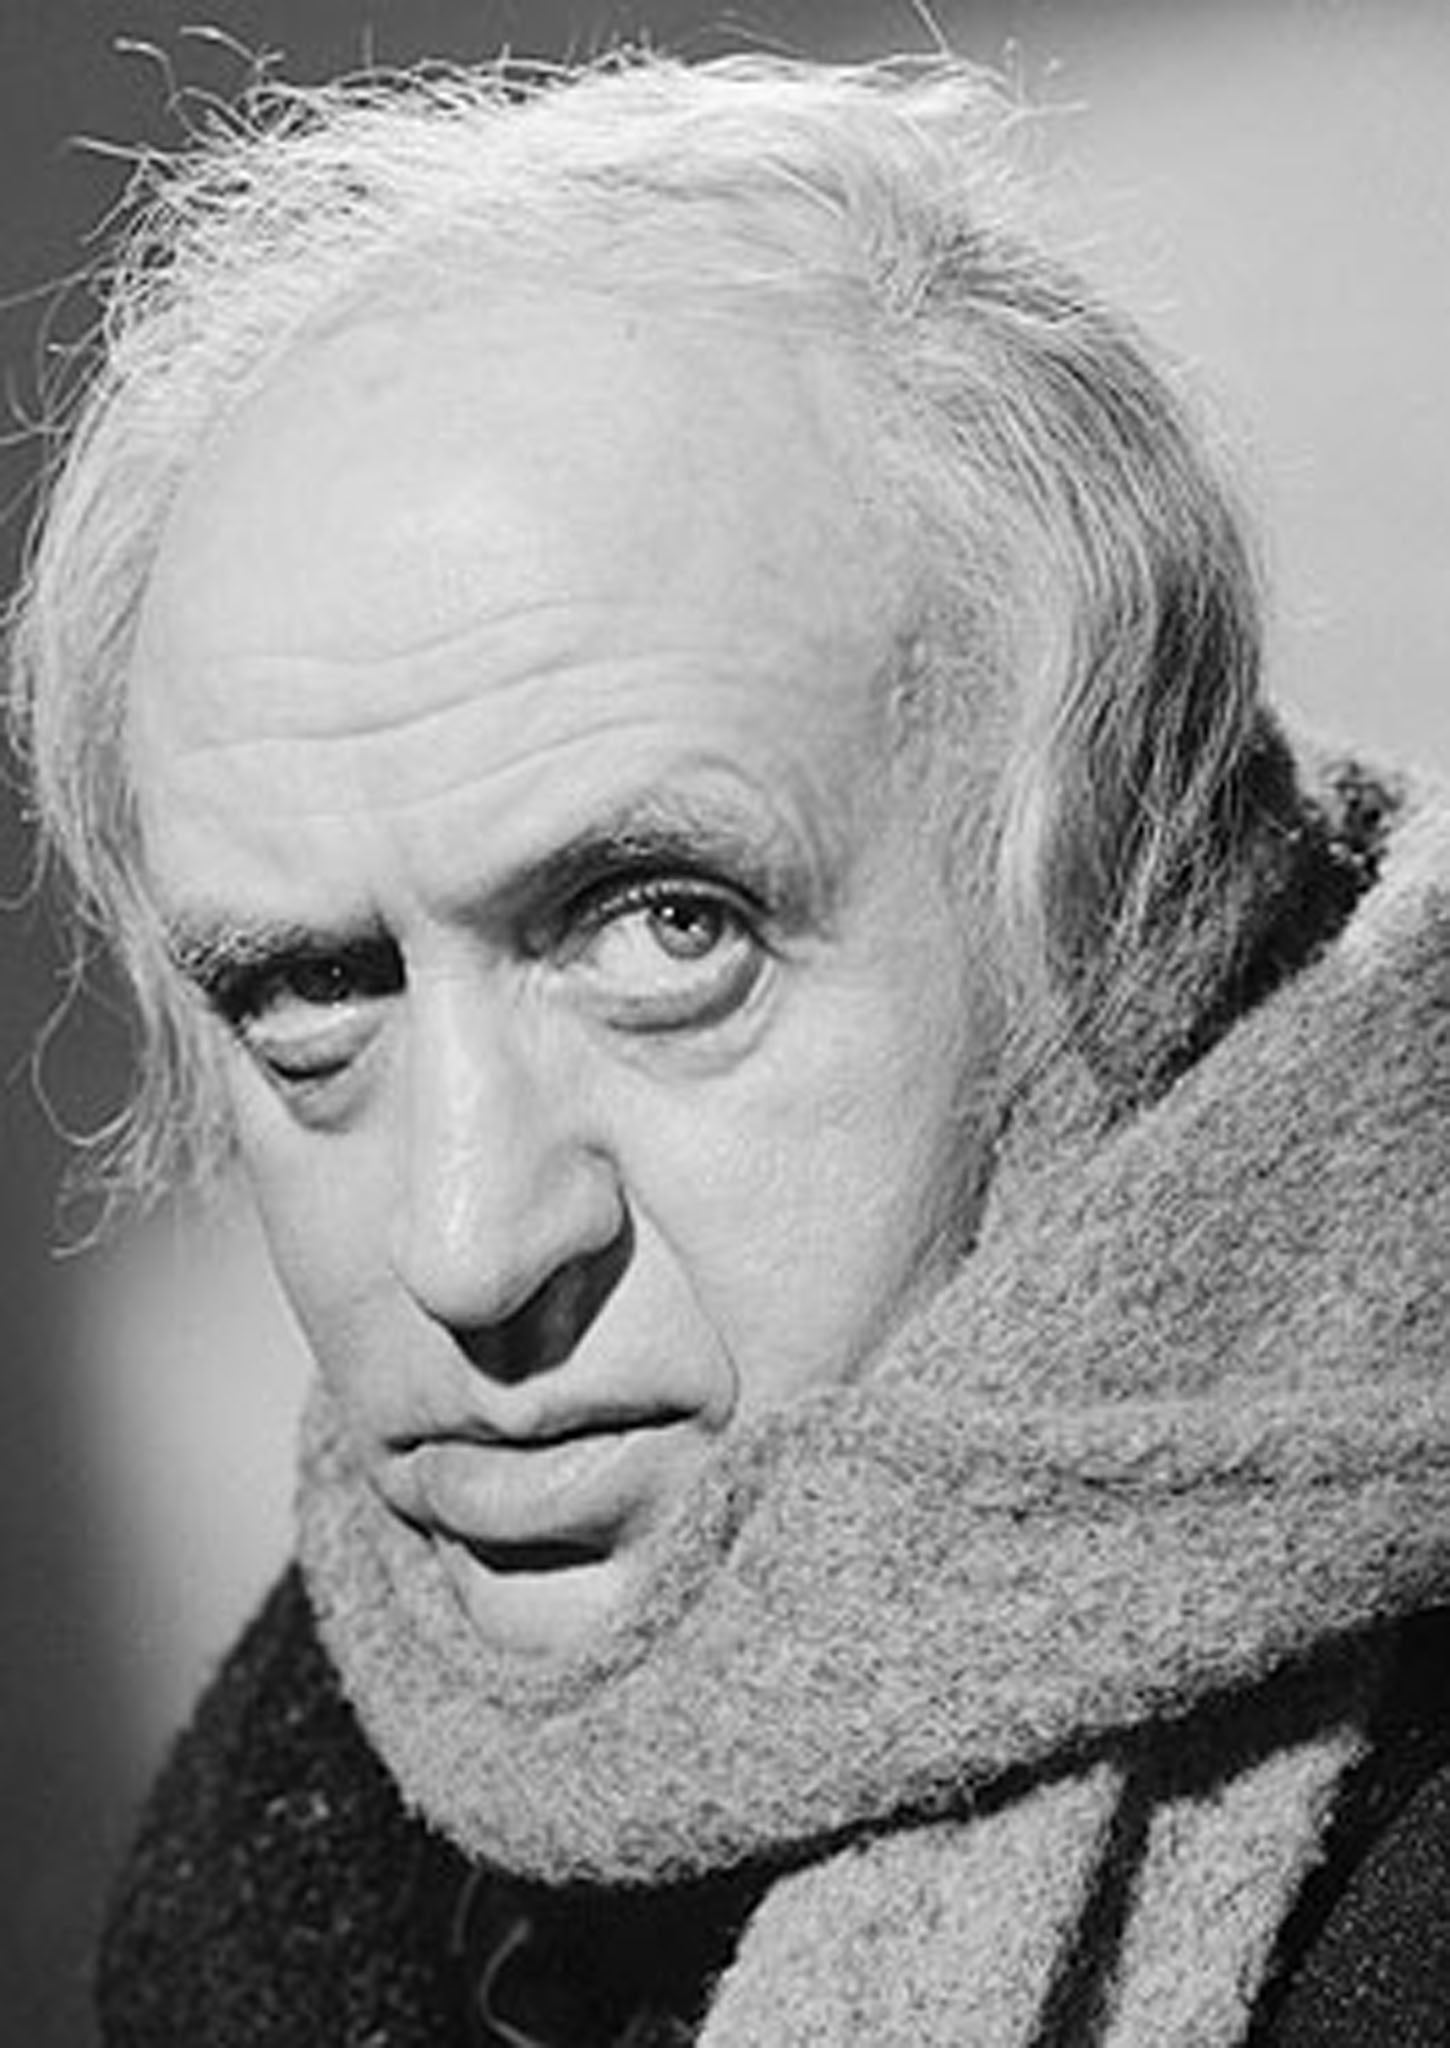 Alastair Sim brought out the author’s poetry in the 1951 film